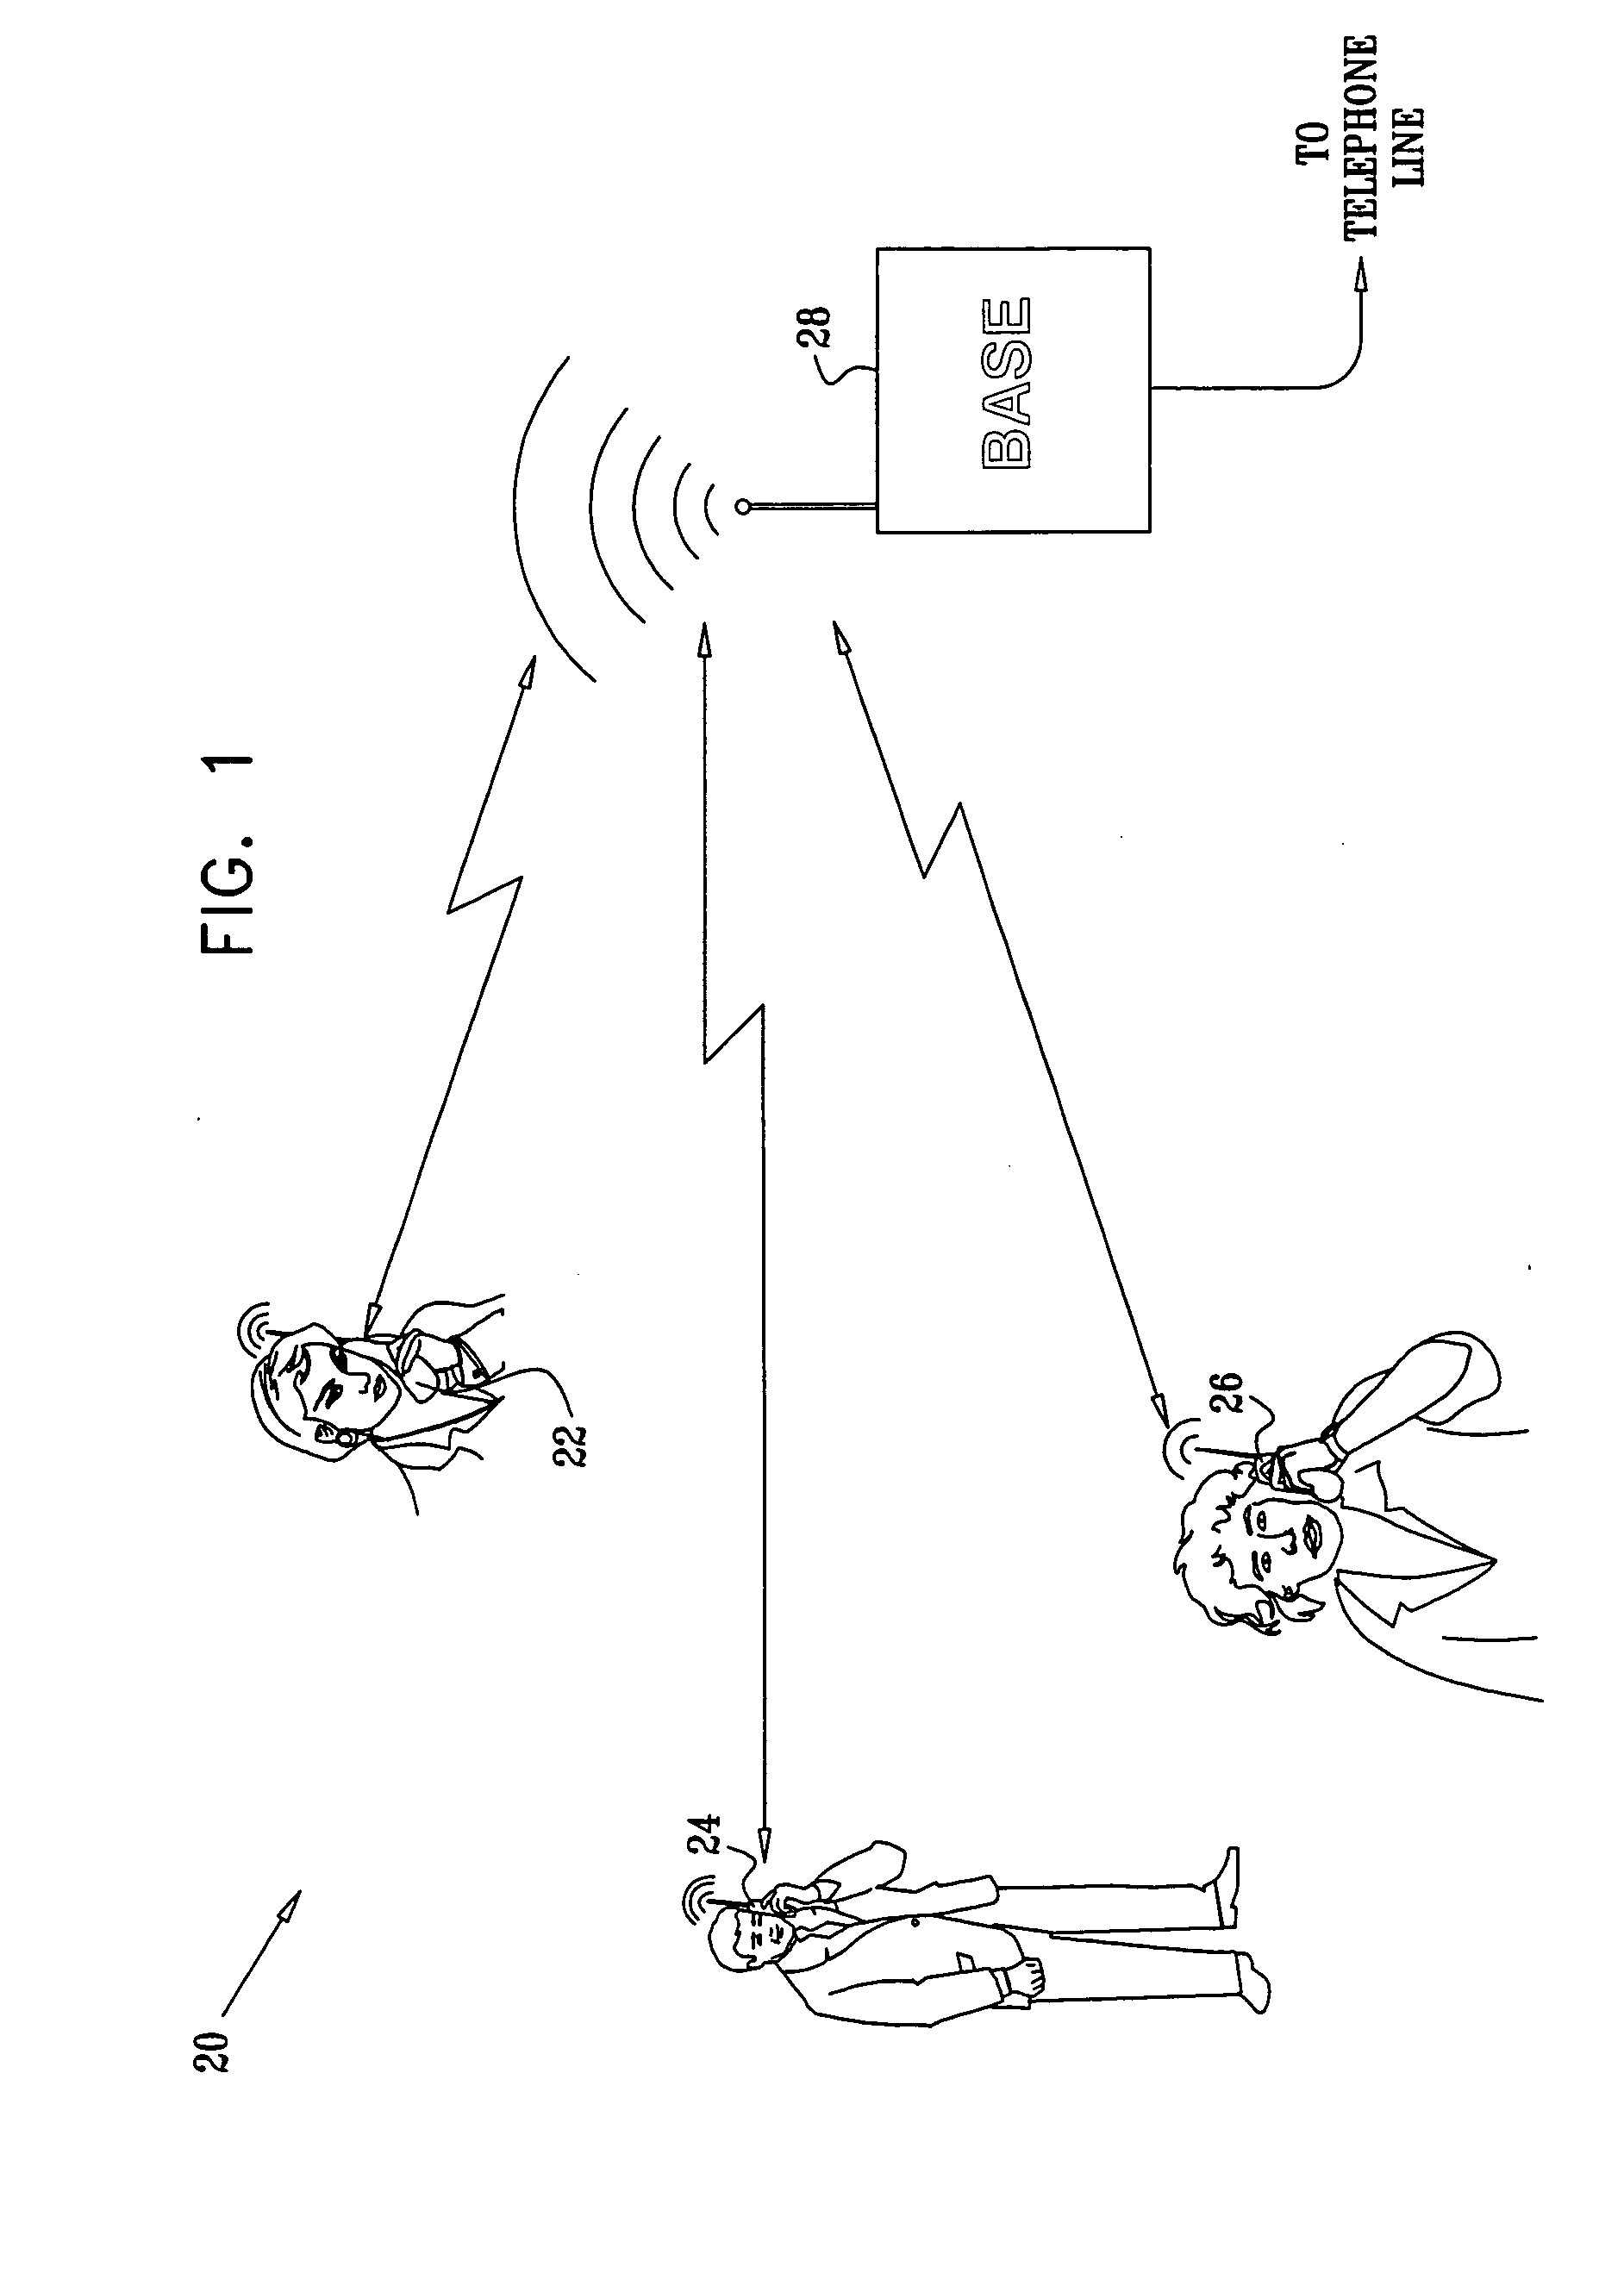 Multiplex communication with slotted retransmission on demand